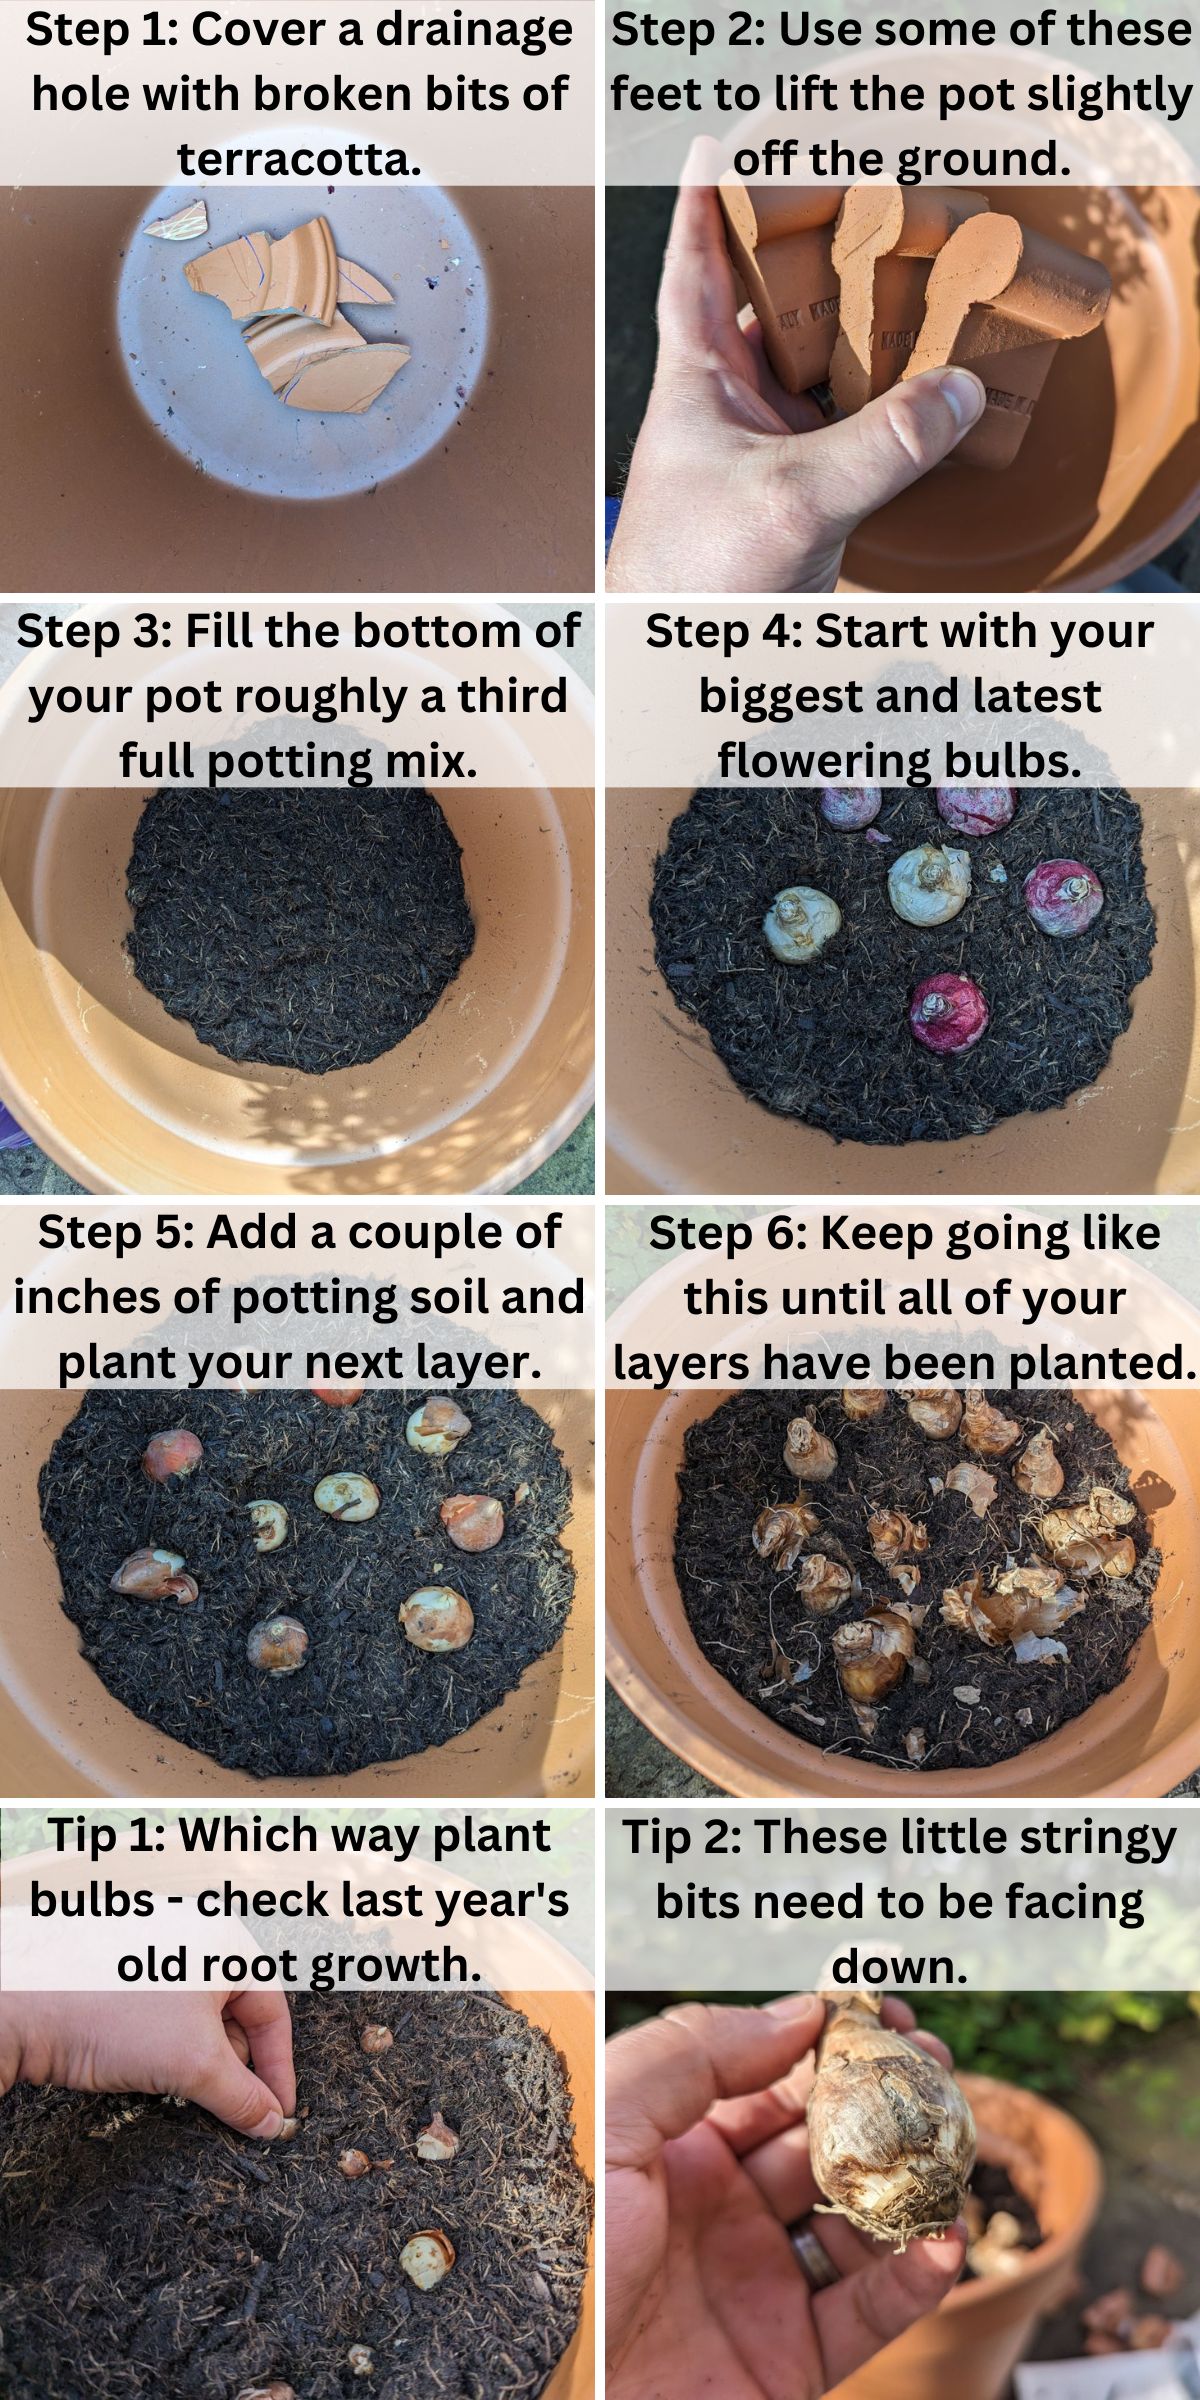 How to Plant a Bulb Lasagna collage.